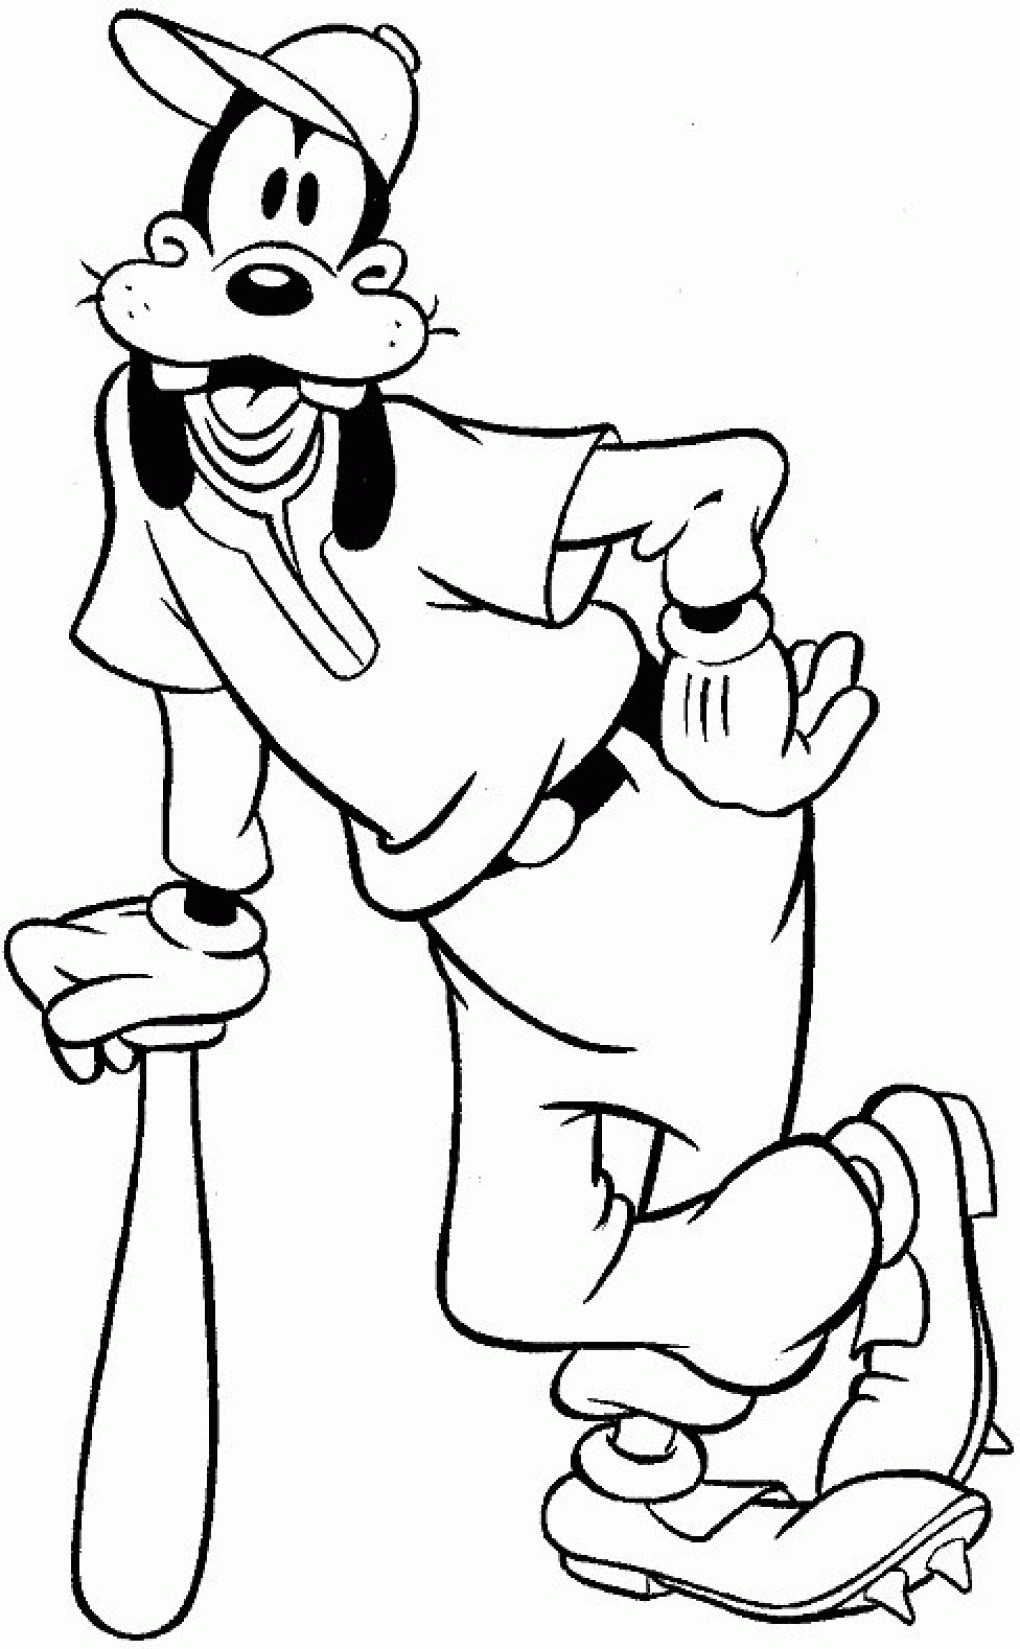 Kids Coloring Page
 Free Printable Goofy Coloring Pages For Kids